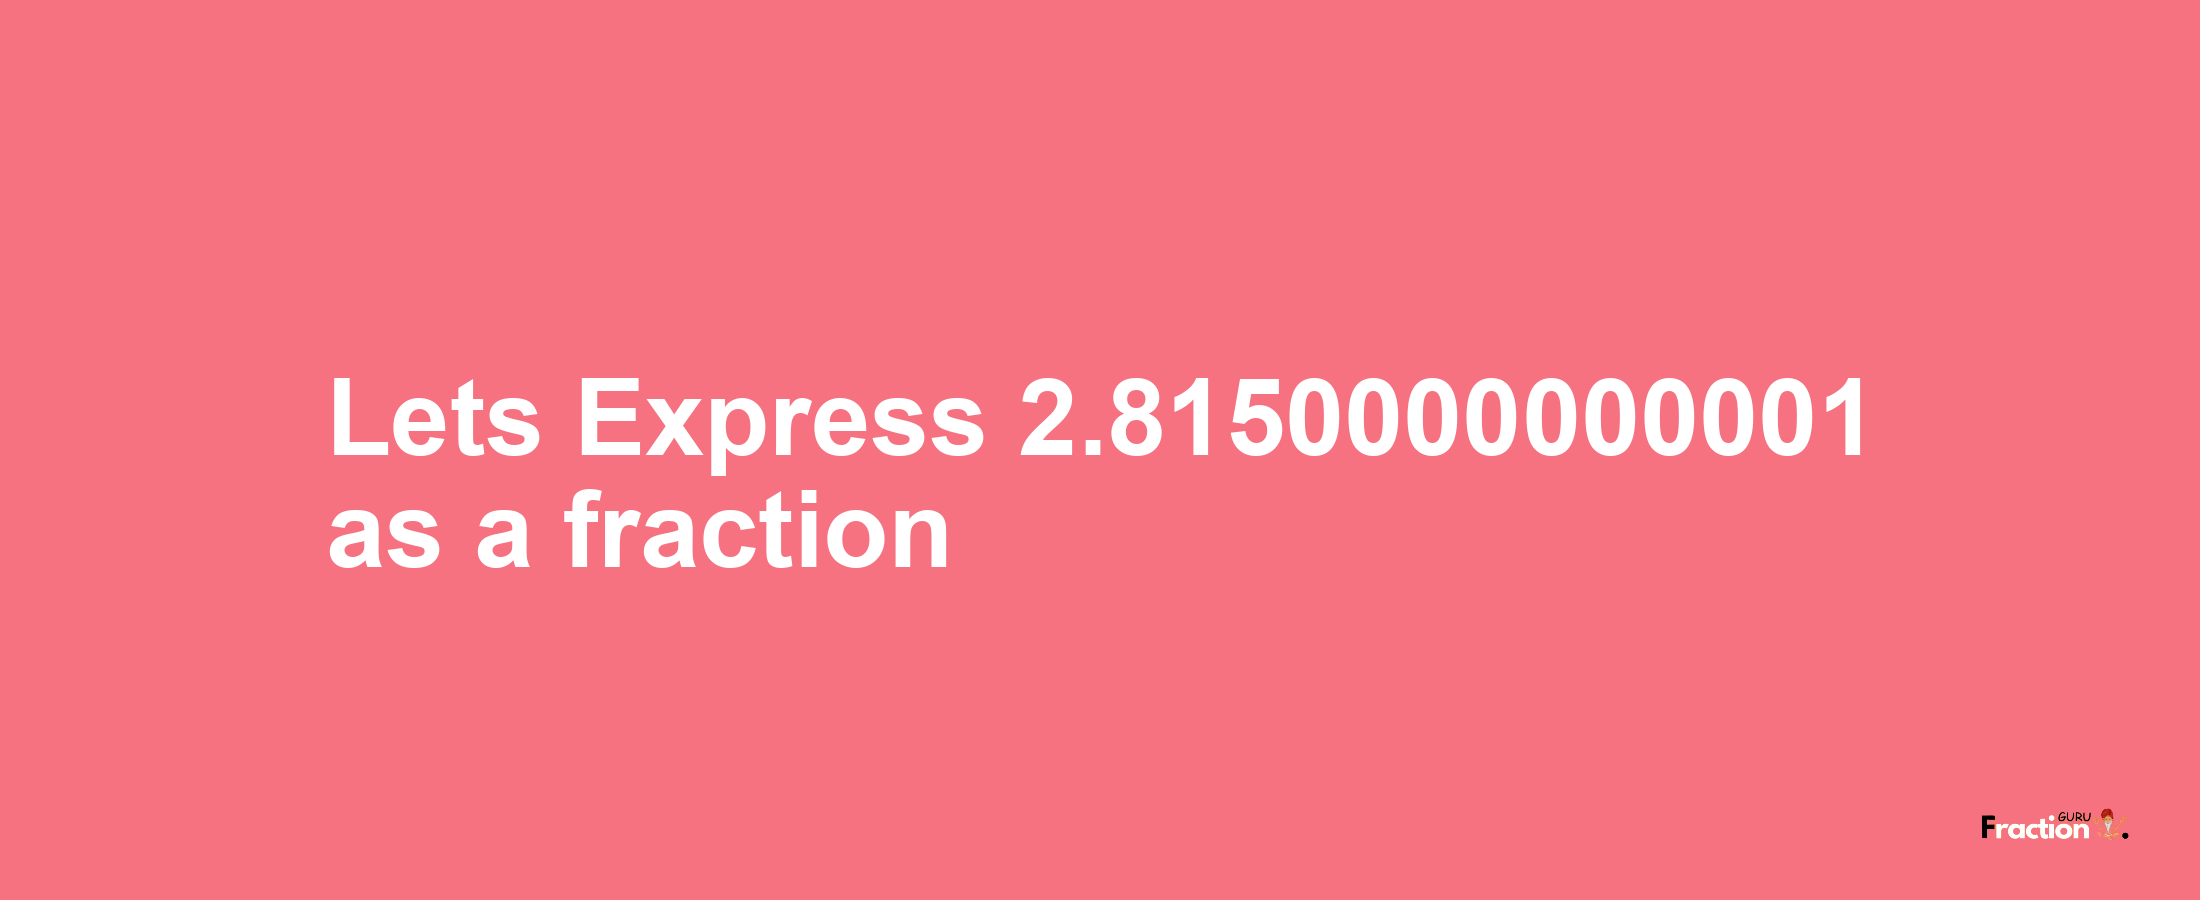 Lets Express 2.8150000000001 as afraction